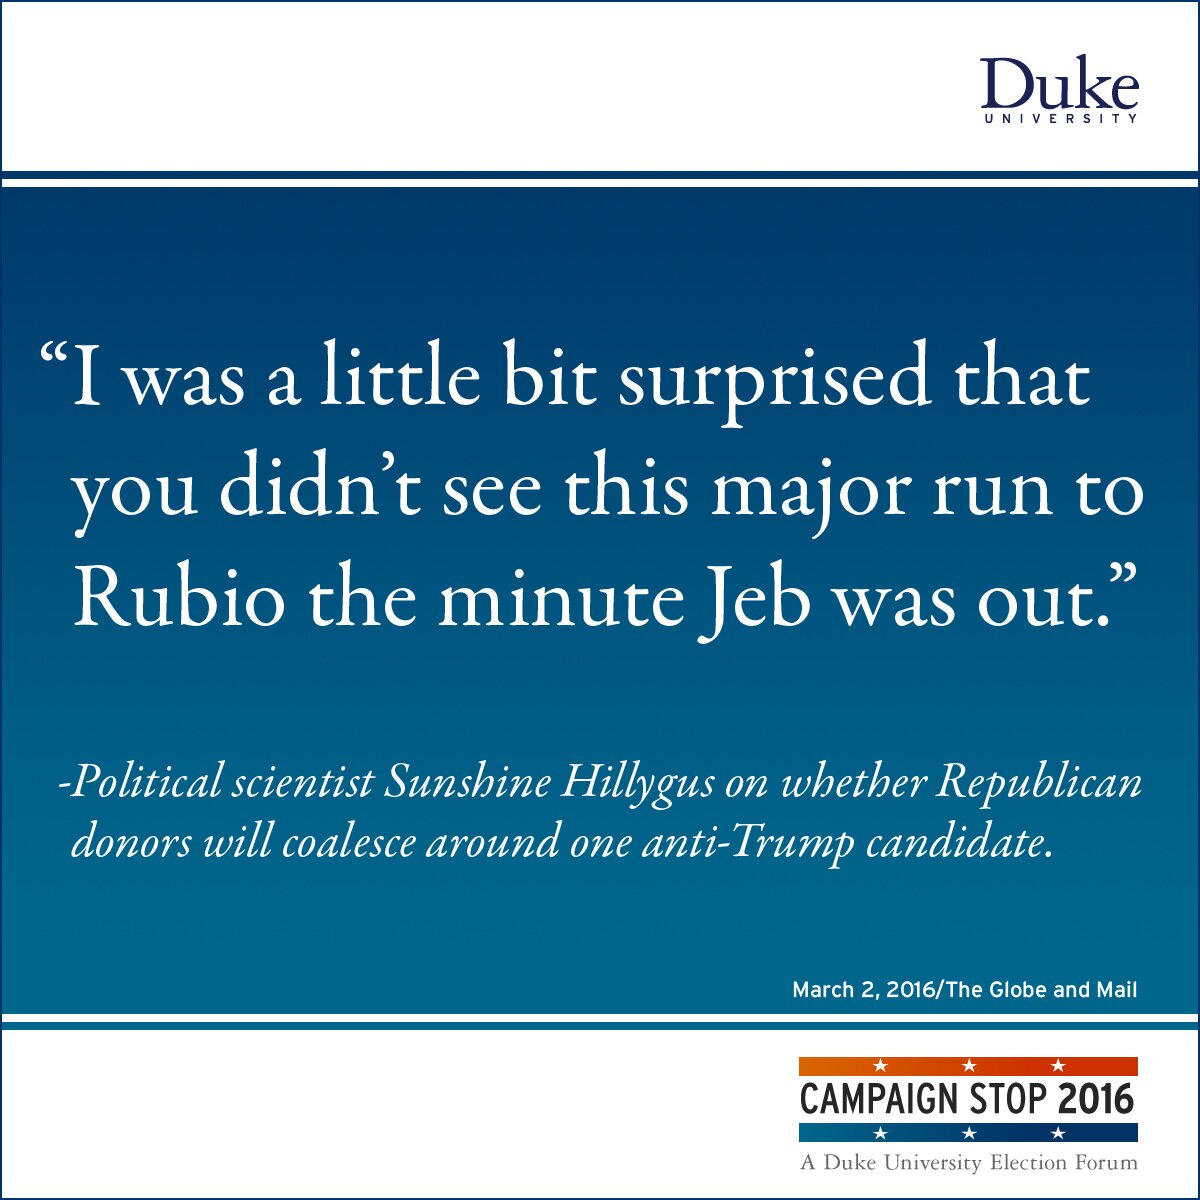 “I was a little bit surprised that you didn’t see this major run to Rubio the minute Jeb was out.” -Political scientist Sunshine Hillygus on whether Republican donors will coalesce around one anti-Trump candidate.